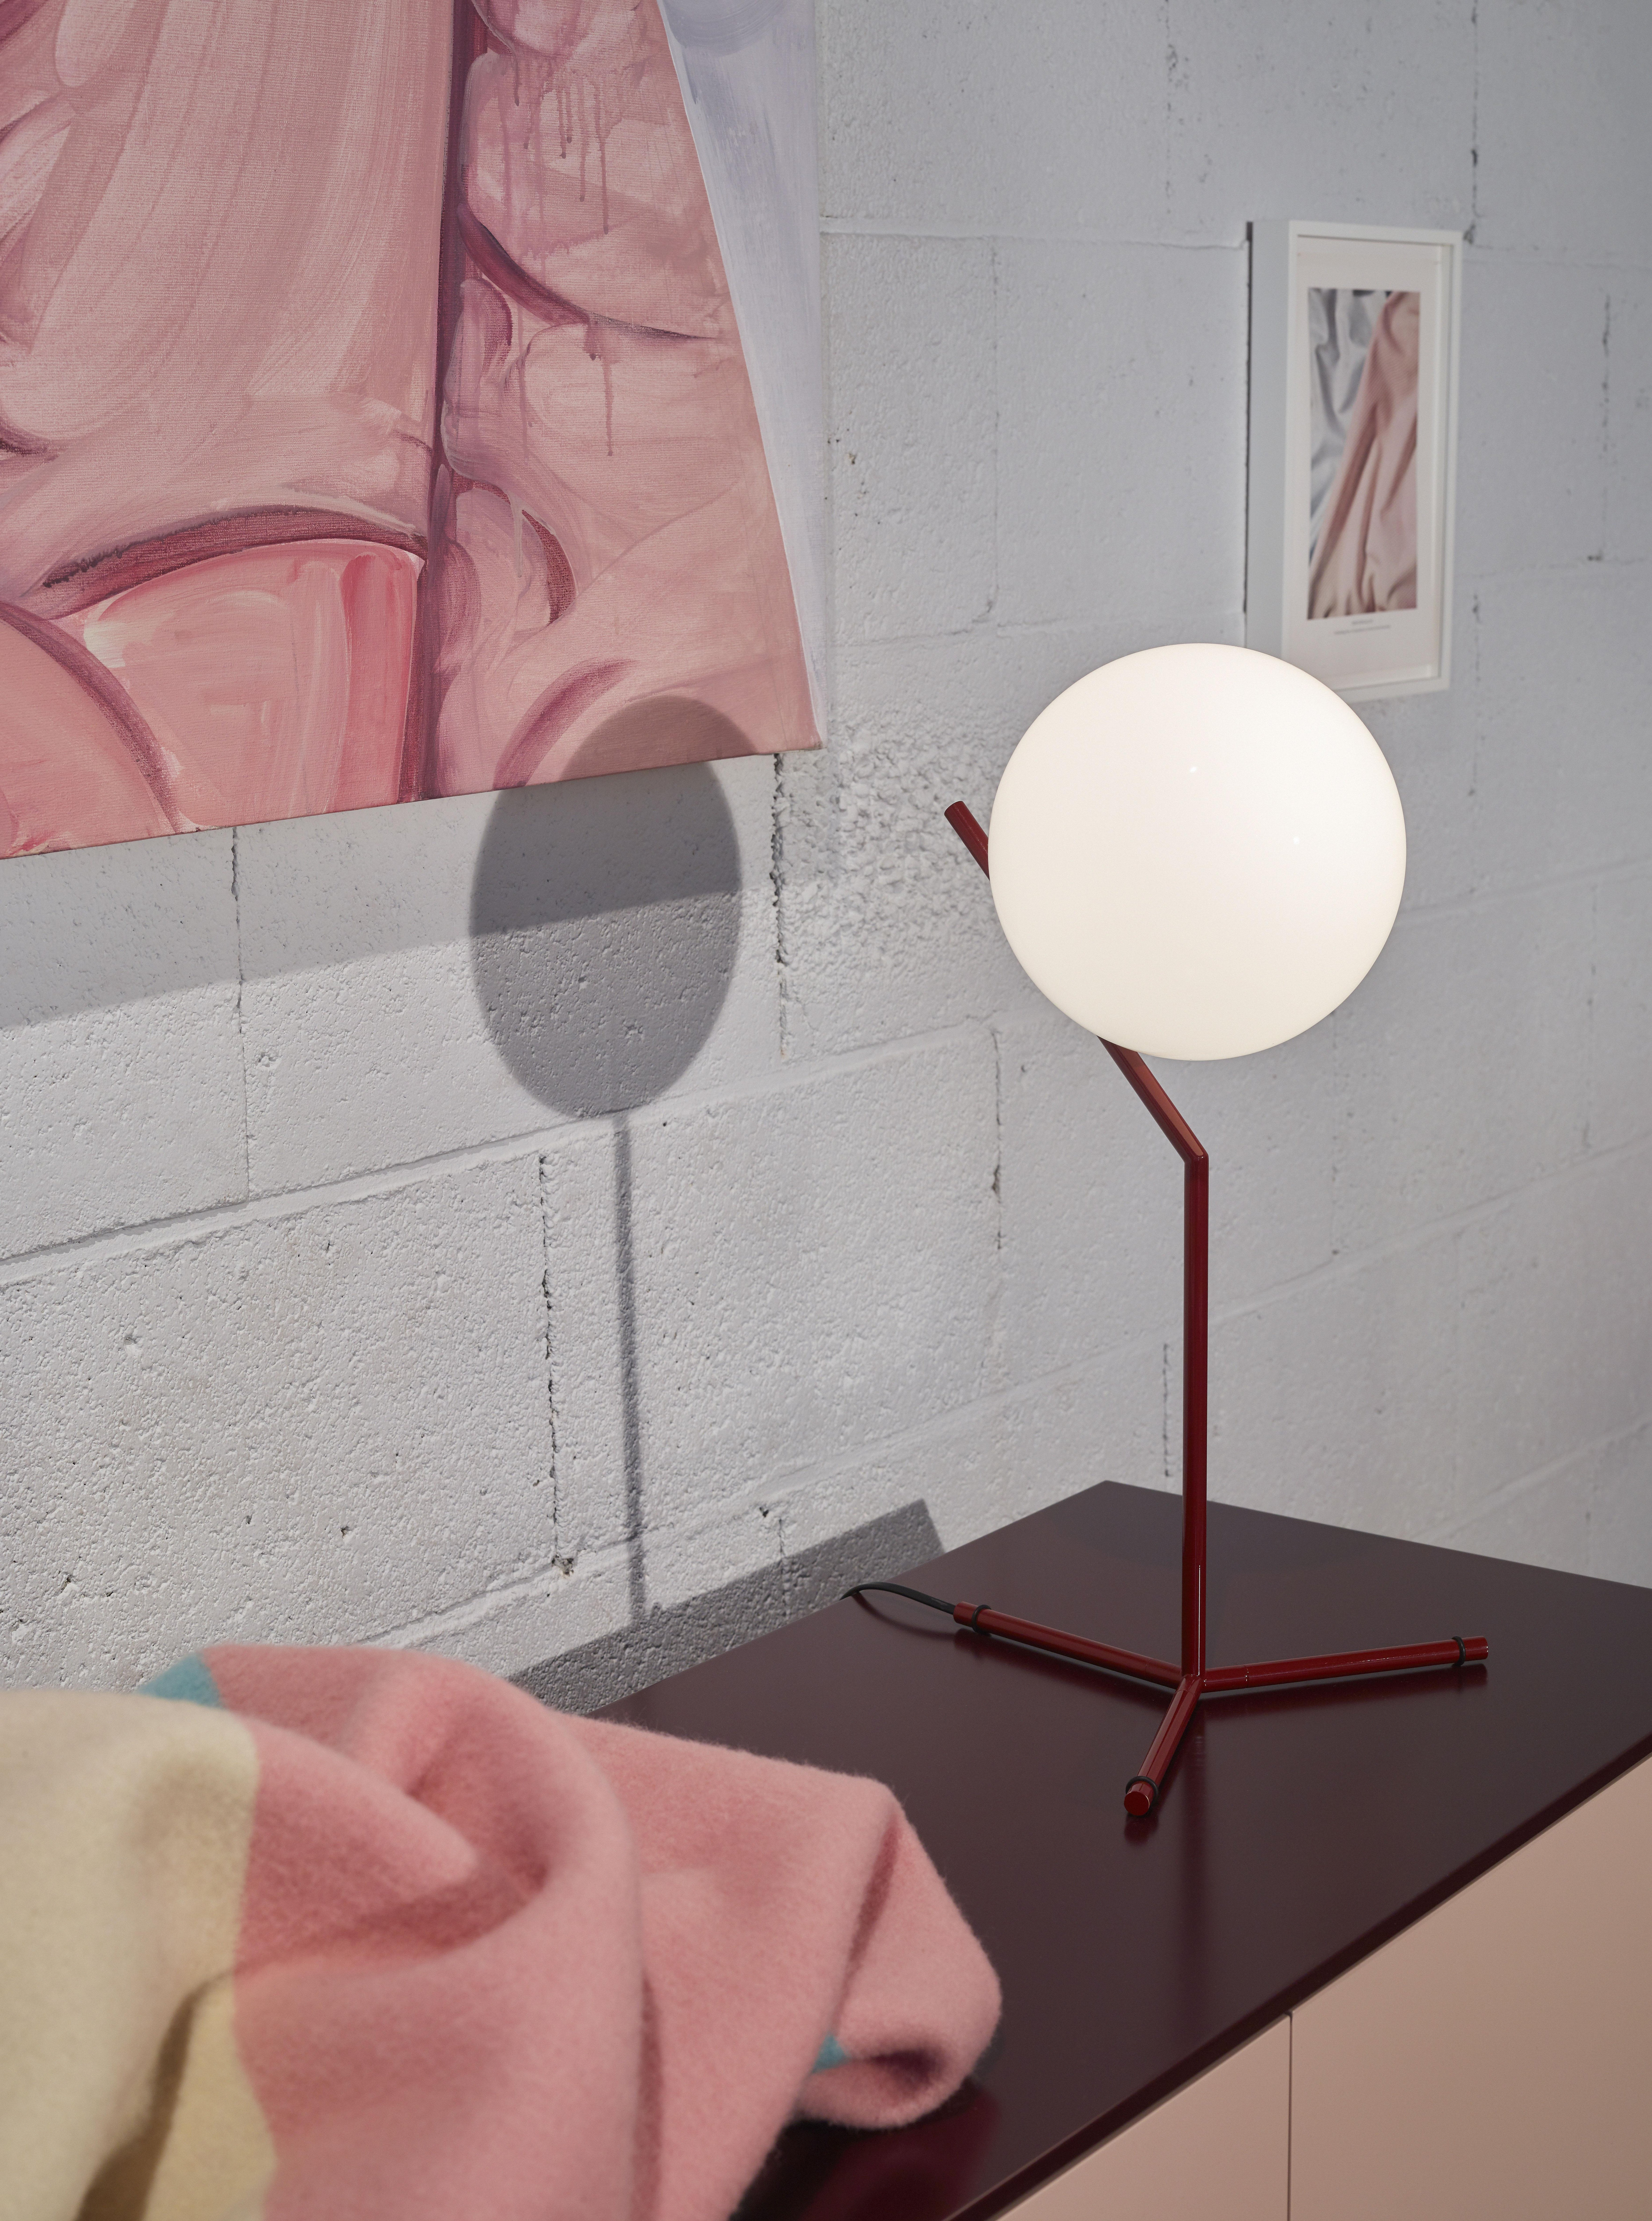 IC Lights T by renowned designer Michael Anastassiades consists of a thin steel base that twists and bends at an angle. From there, a blown-glass opaline orb delicately balances. The table lamp, which casts diffused light, can be adjusted by a